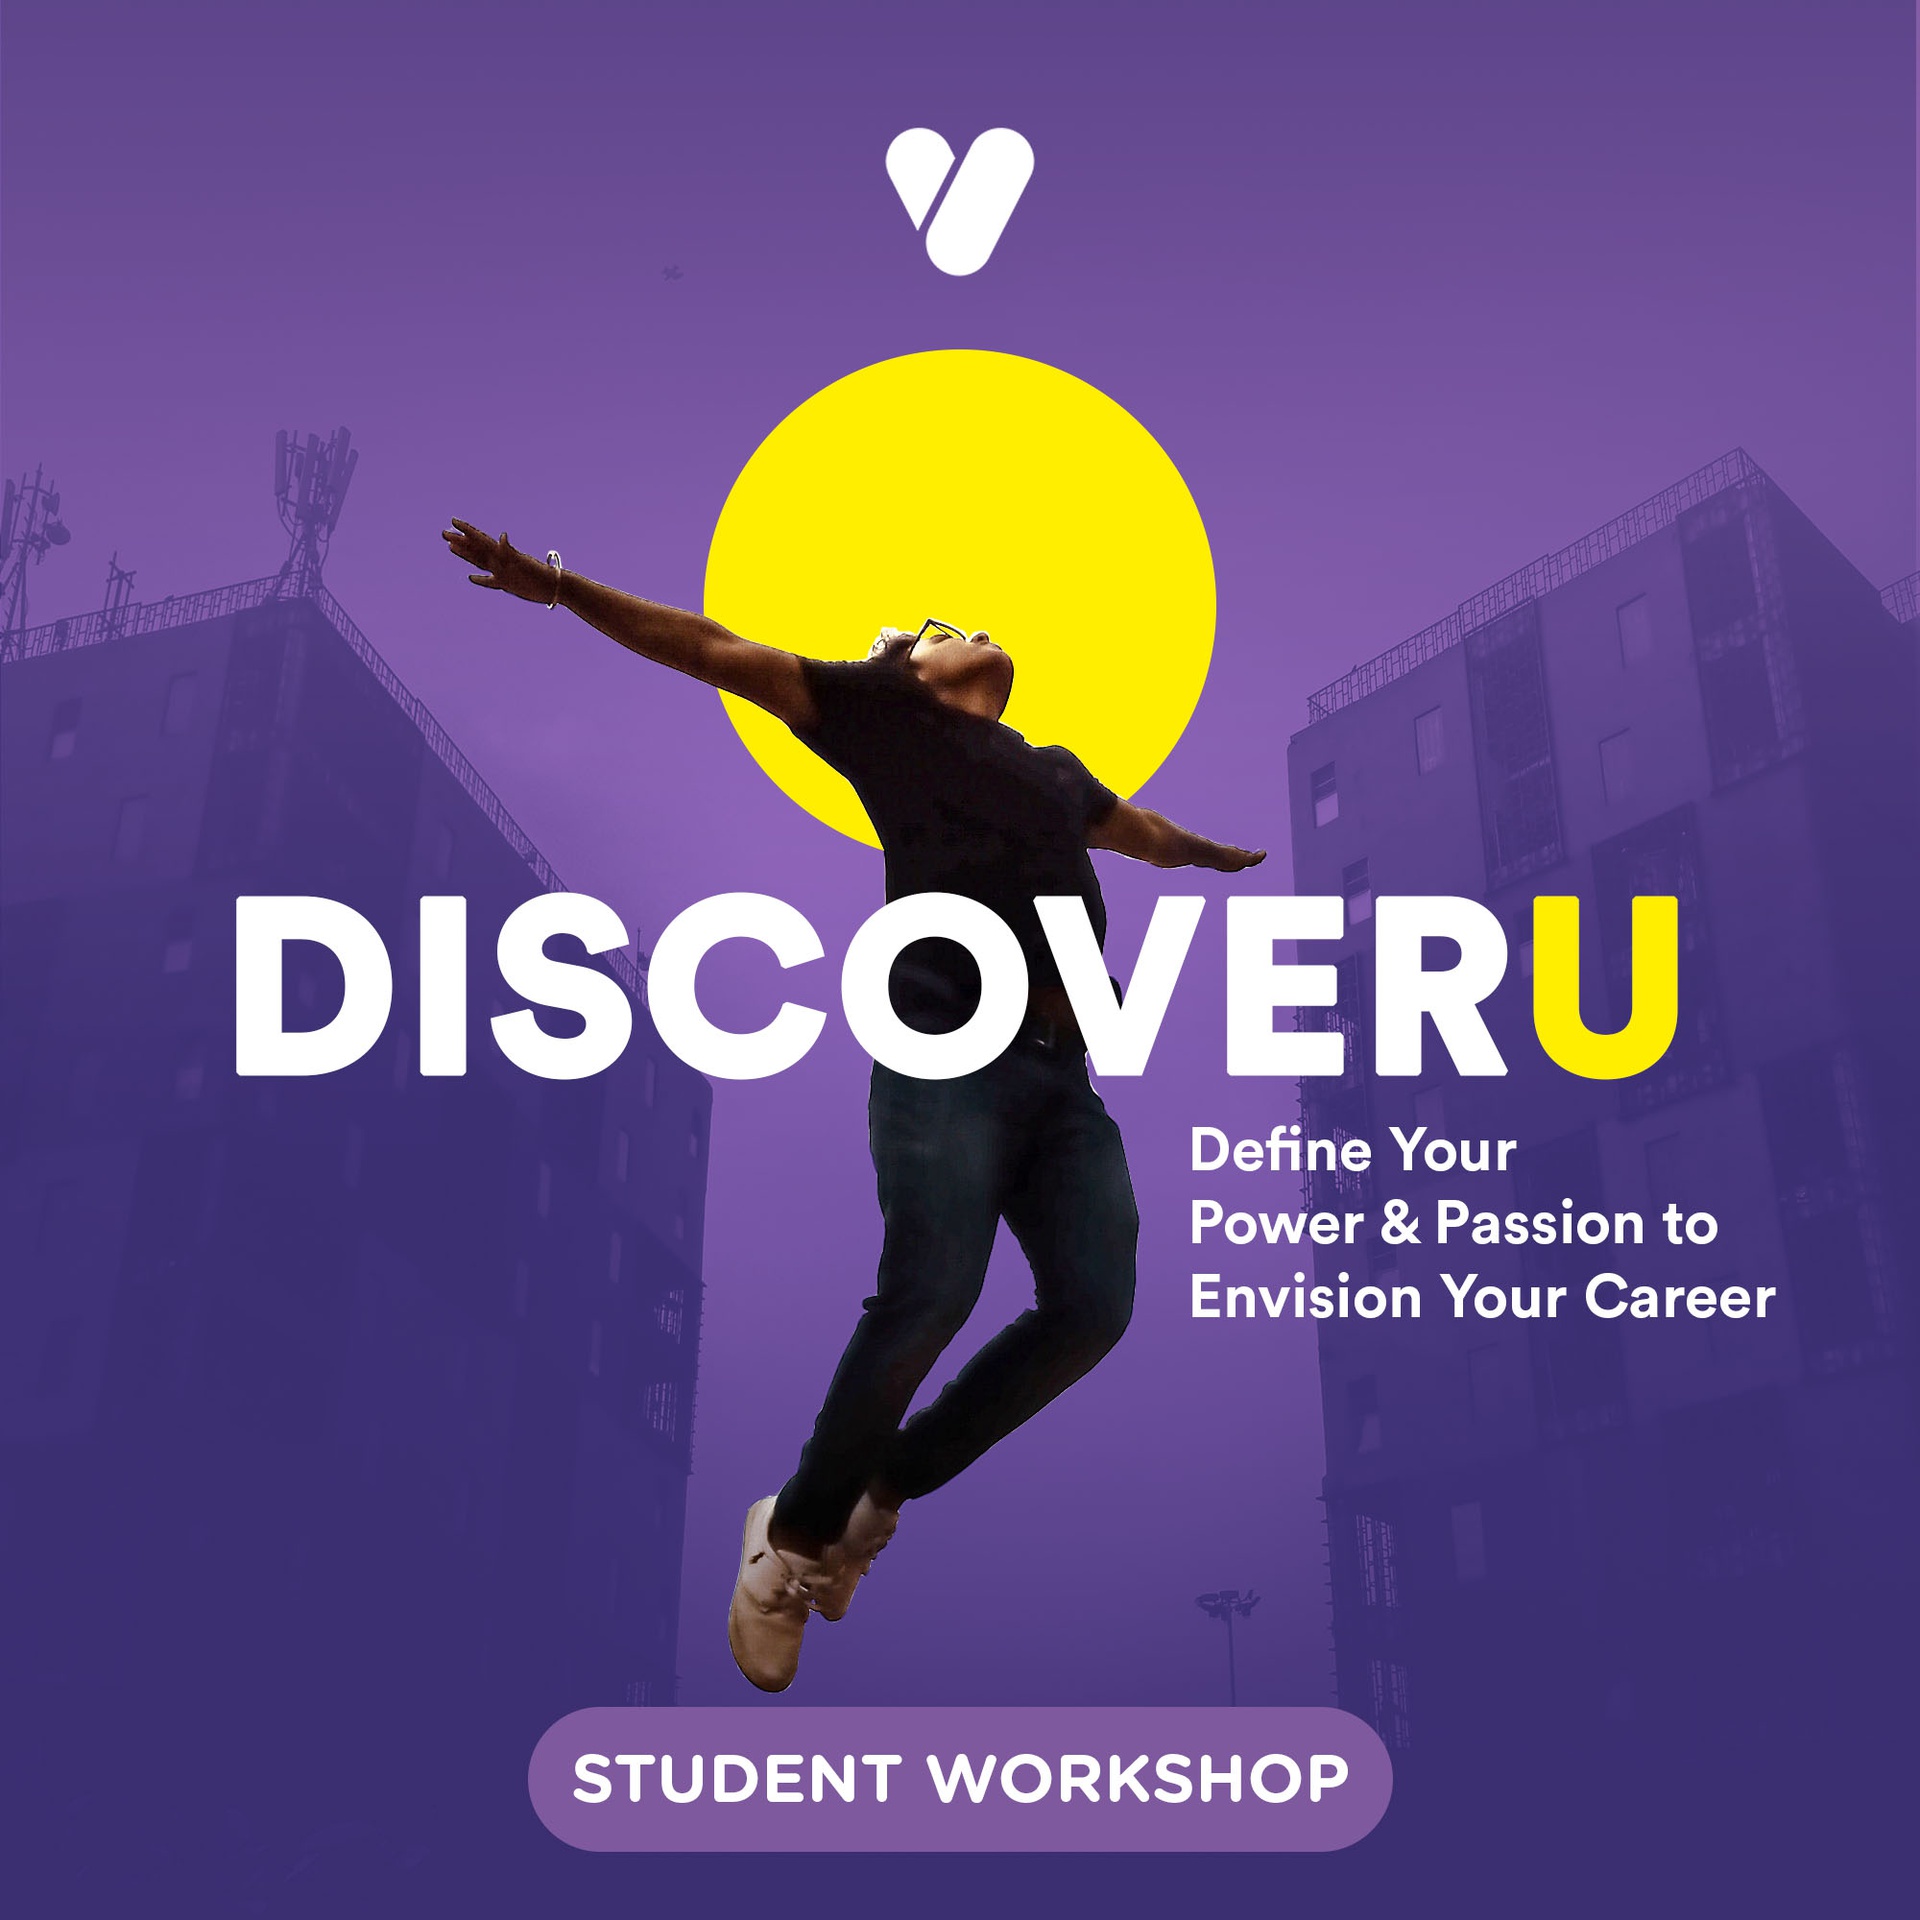 DiscoverU: Define Your Power & Passion to Envision Your Career